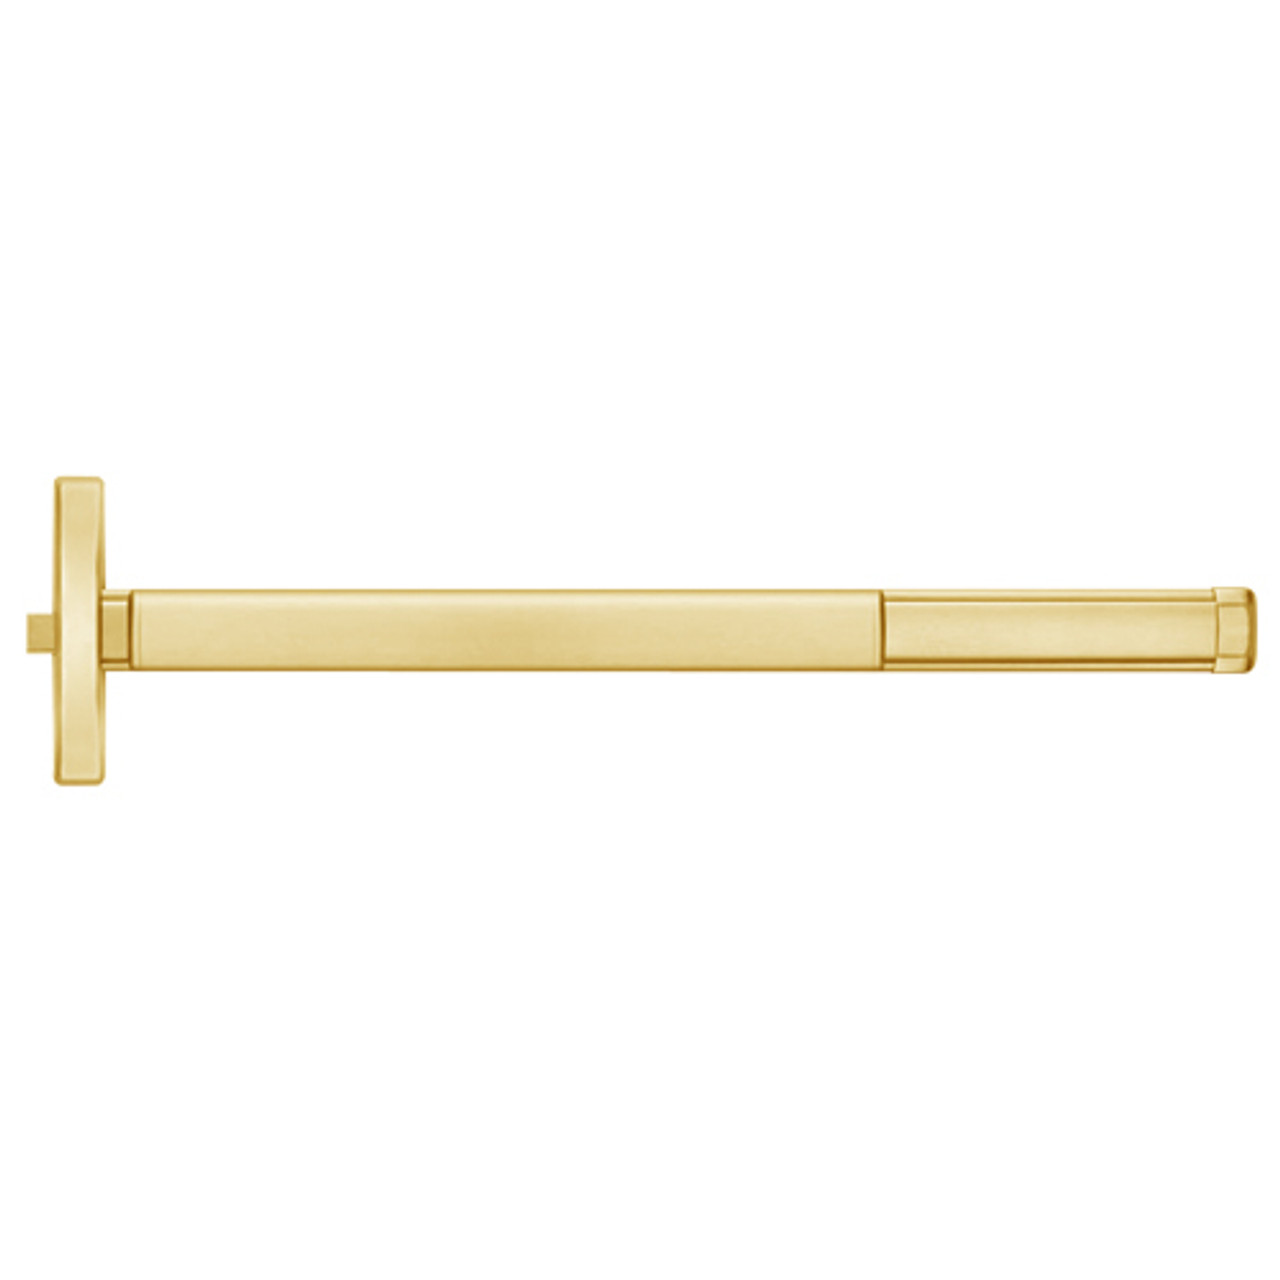 ELR2402-605-36 PHI 2400 Series Non Fire Rated Apex Rim Exit Device with Electric Latch Retraction Prepped for Dummy Trim in Bright Brass Finish